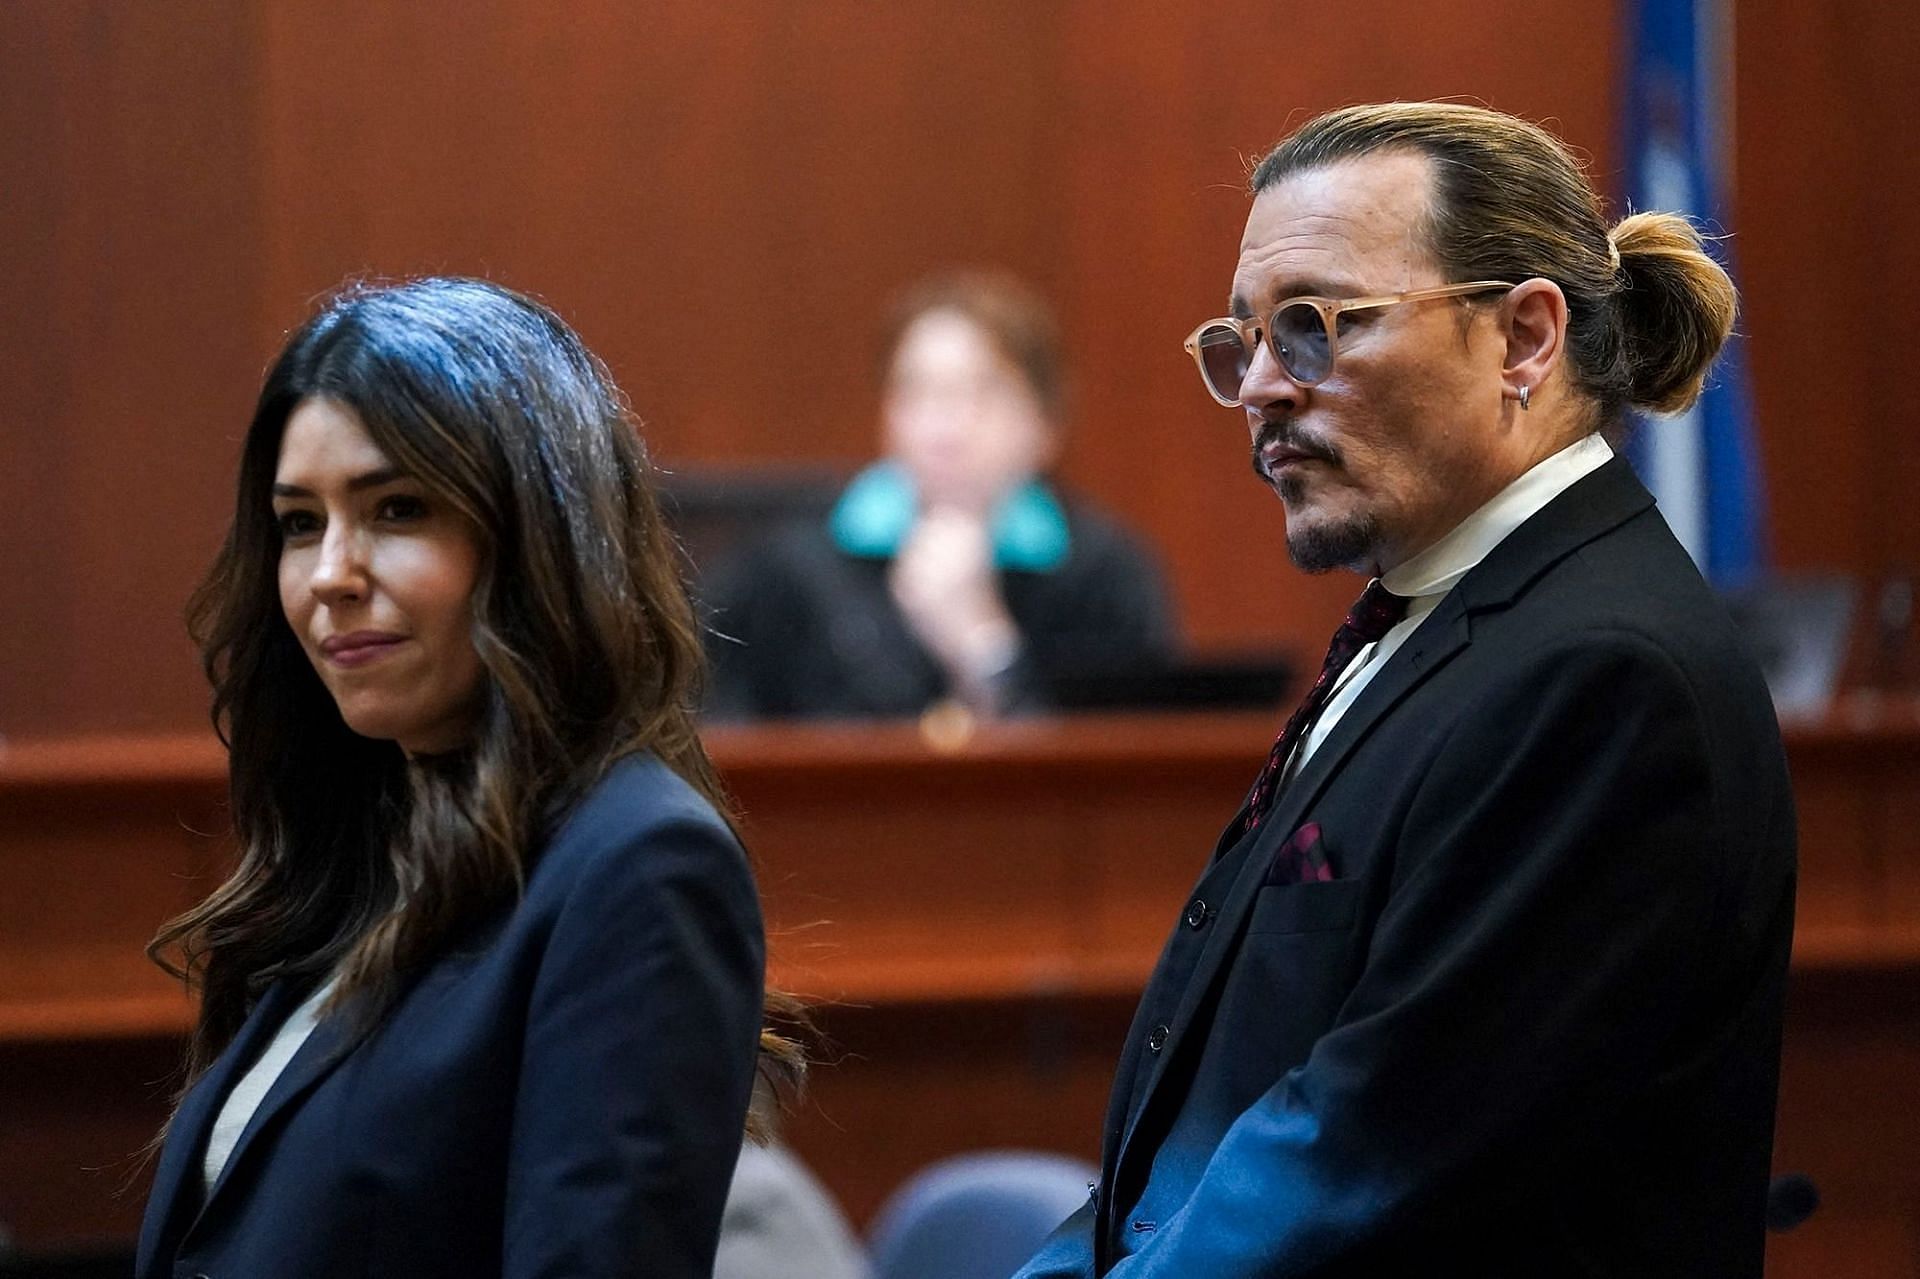 Camille Vasquez and Johnny Depp in the courtroom (Image via Kevin Lamarque/POOL/AFP/Getty Images)